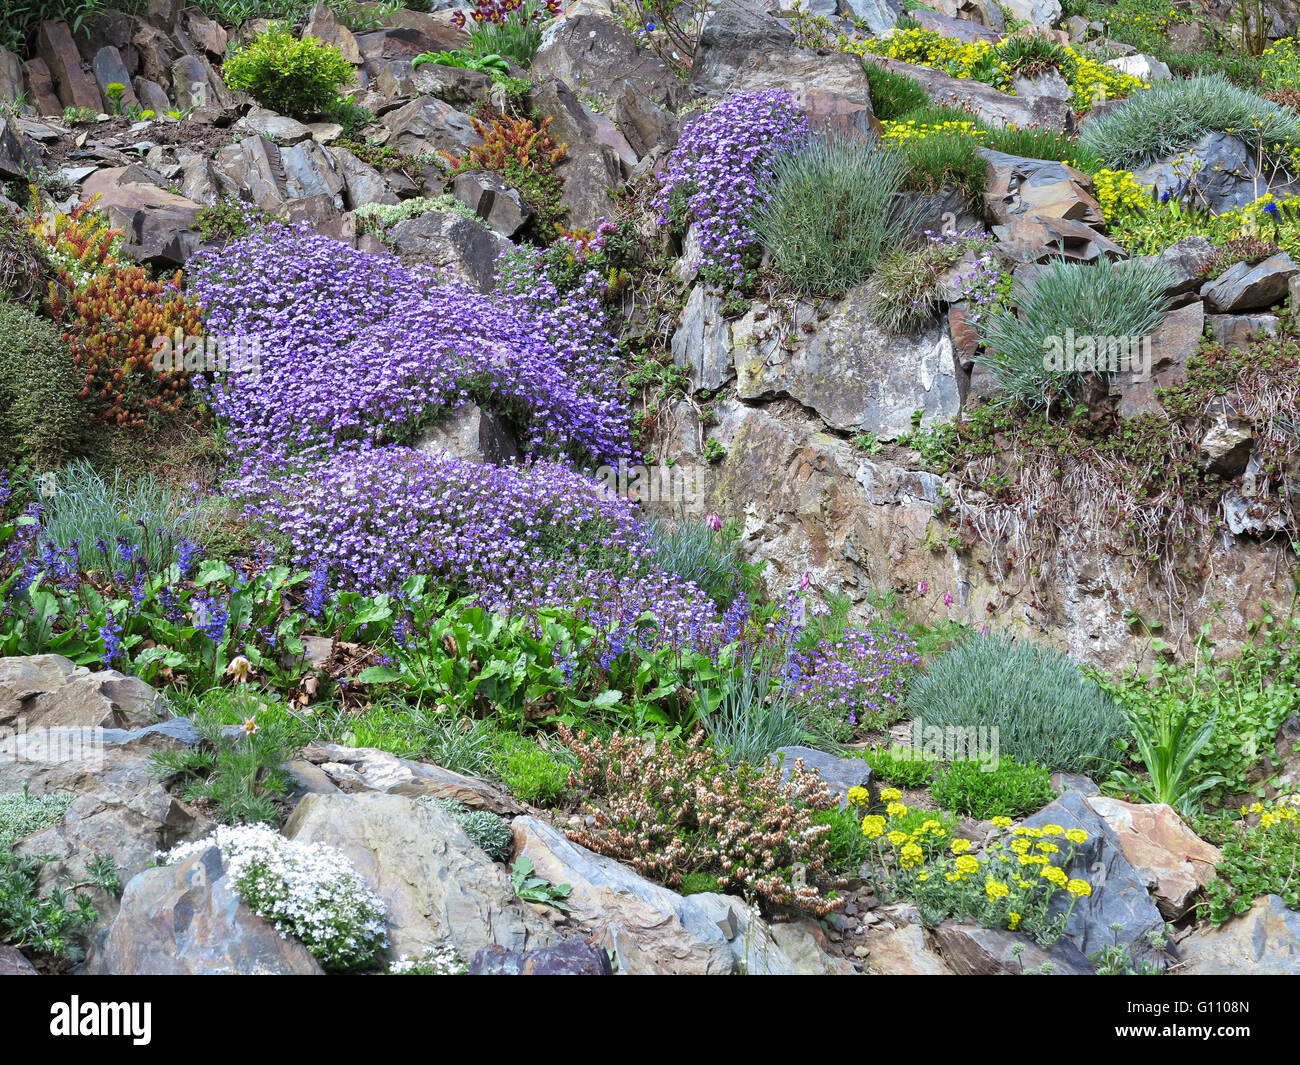 Rock garden with various flowers Stock Photo